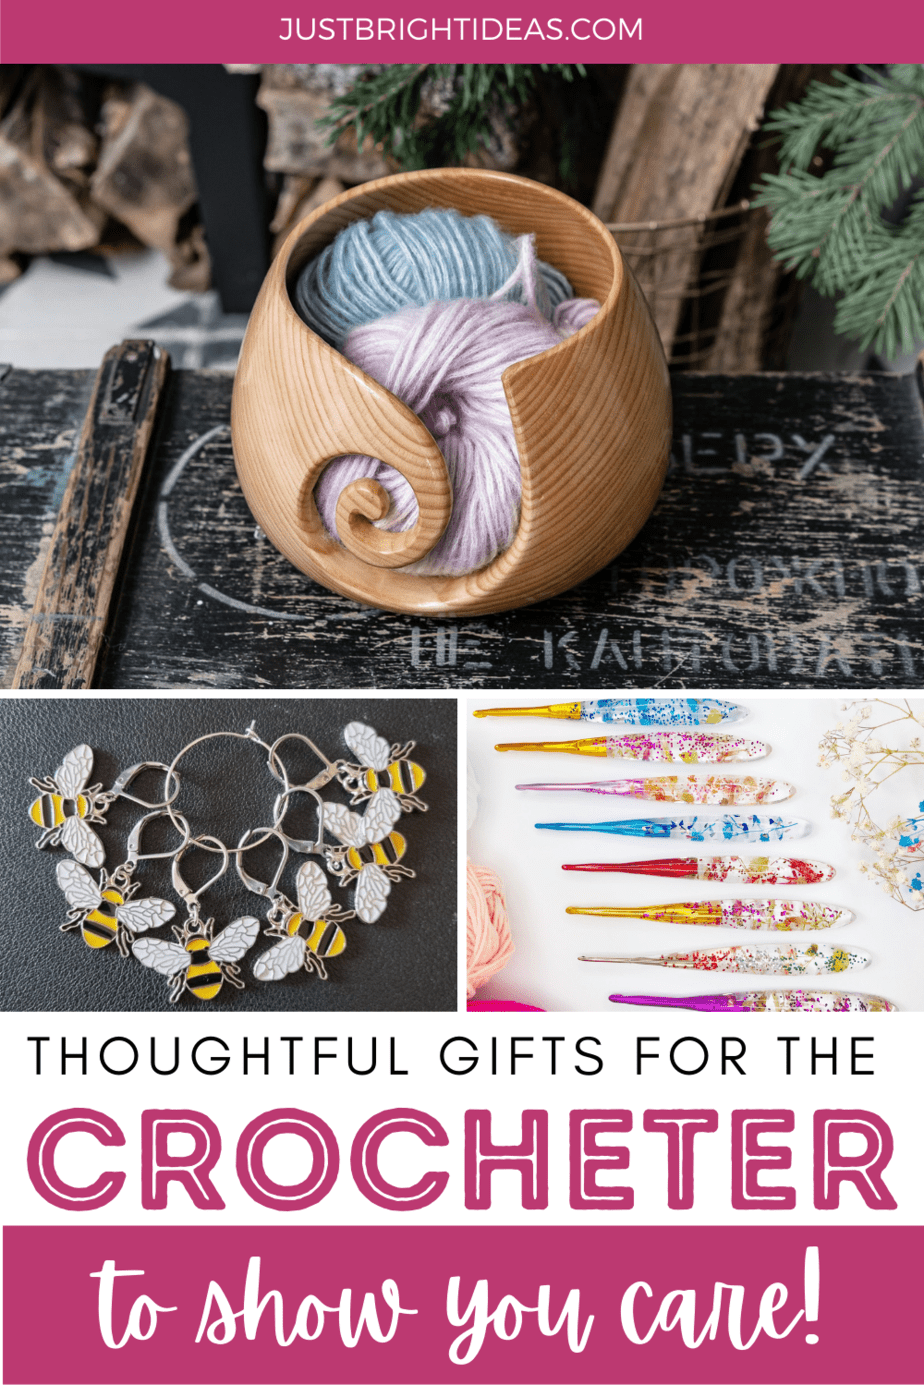 14 Thoughtful Christmas Gifts for Crocheters They'll Love to Open